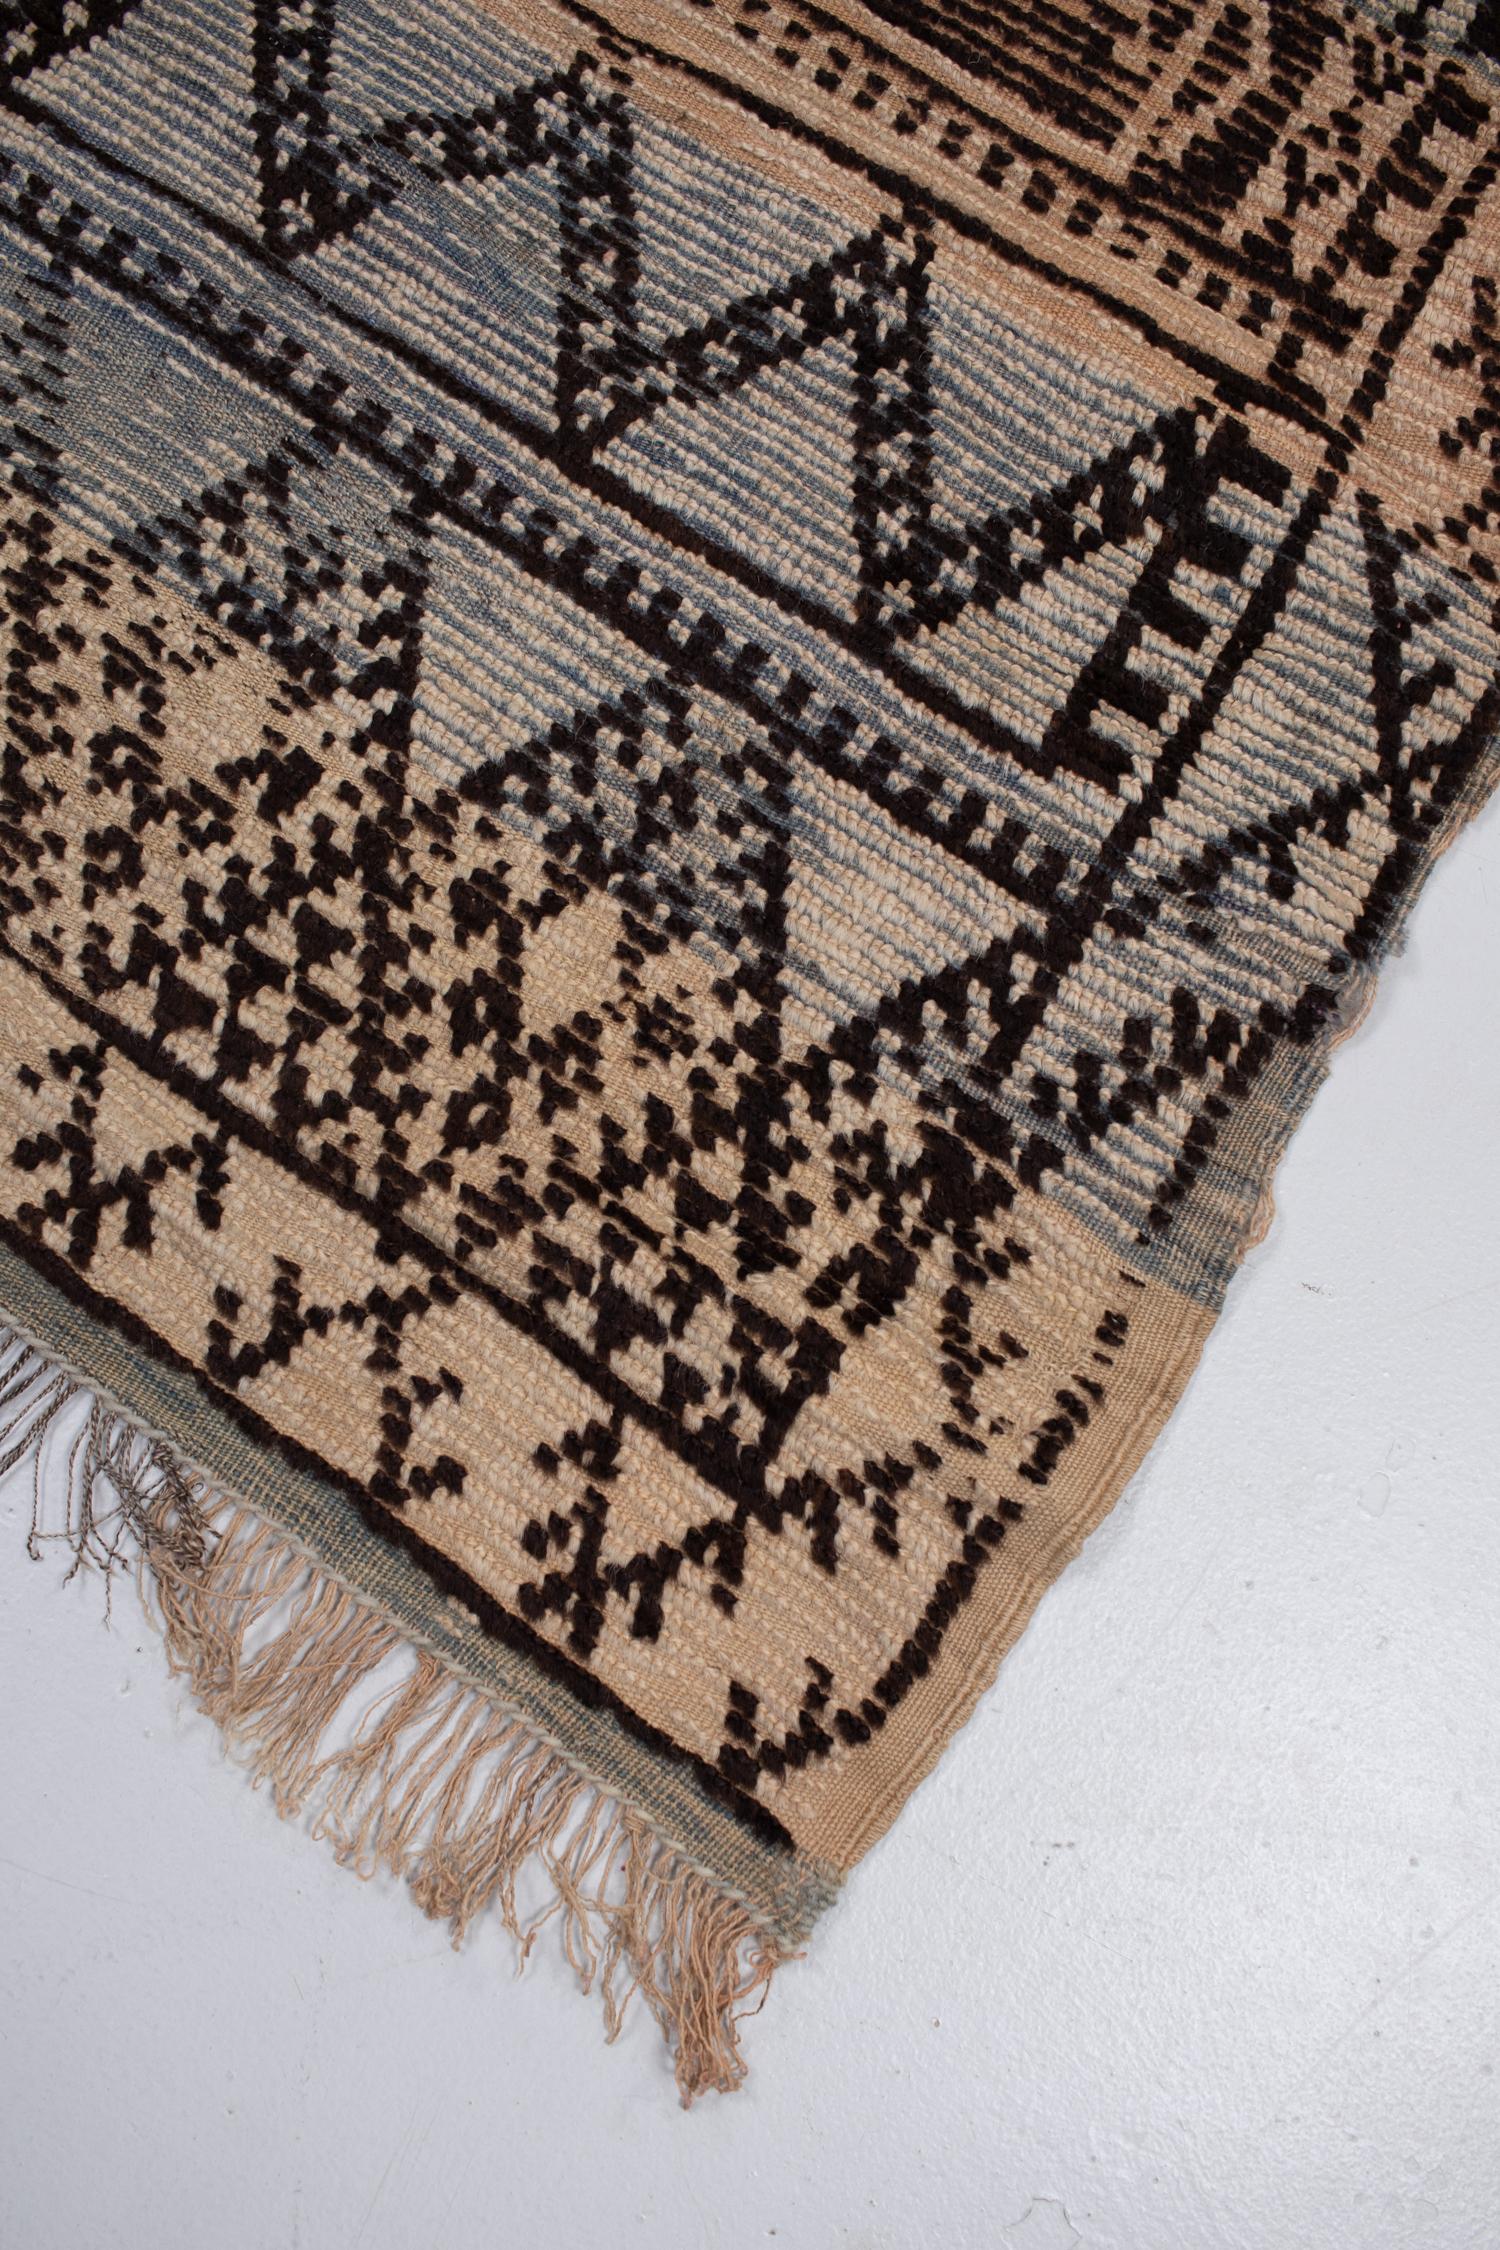 Vintage Moroccan Taznakht Gallery Rug In Good Condition For Sale In West Palm Beach, FL